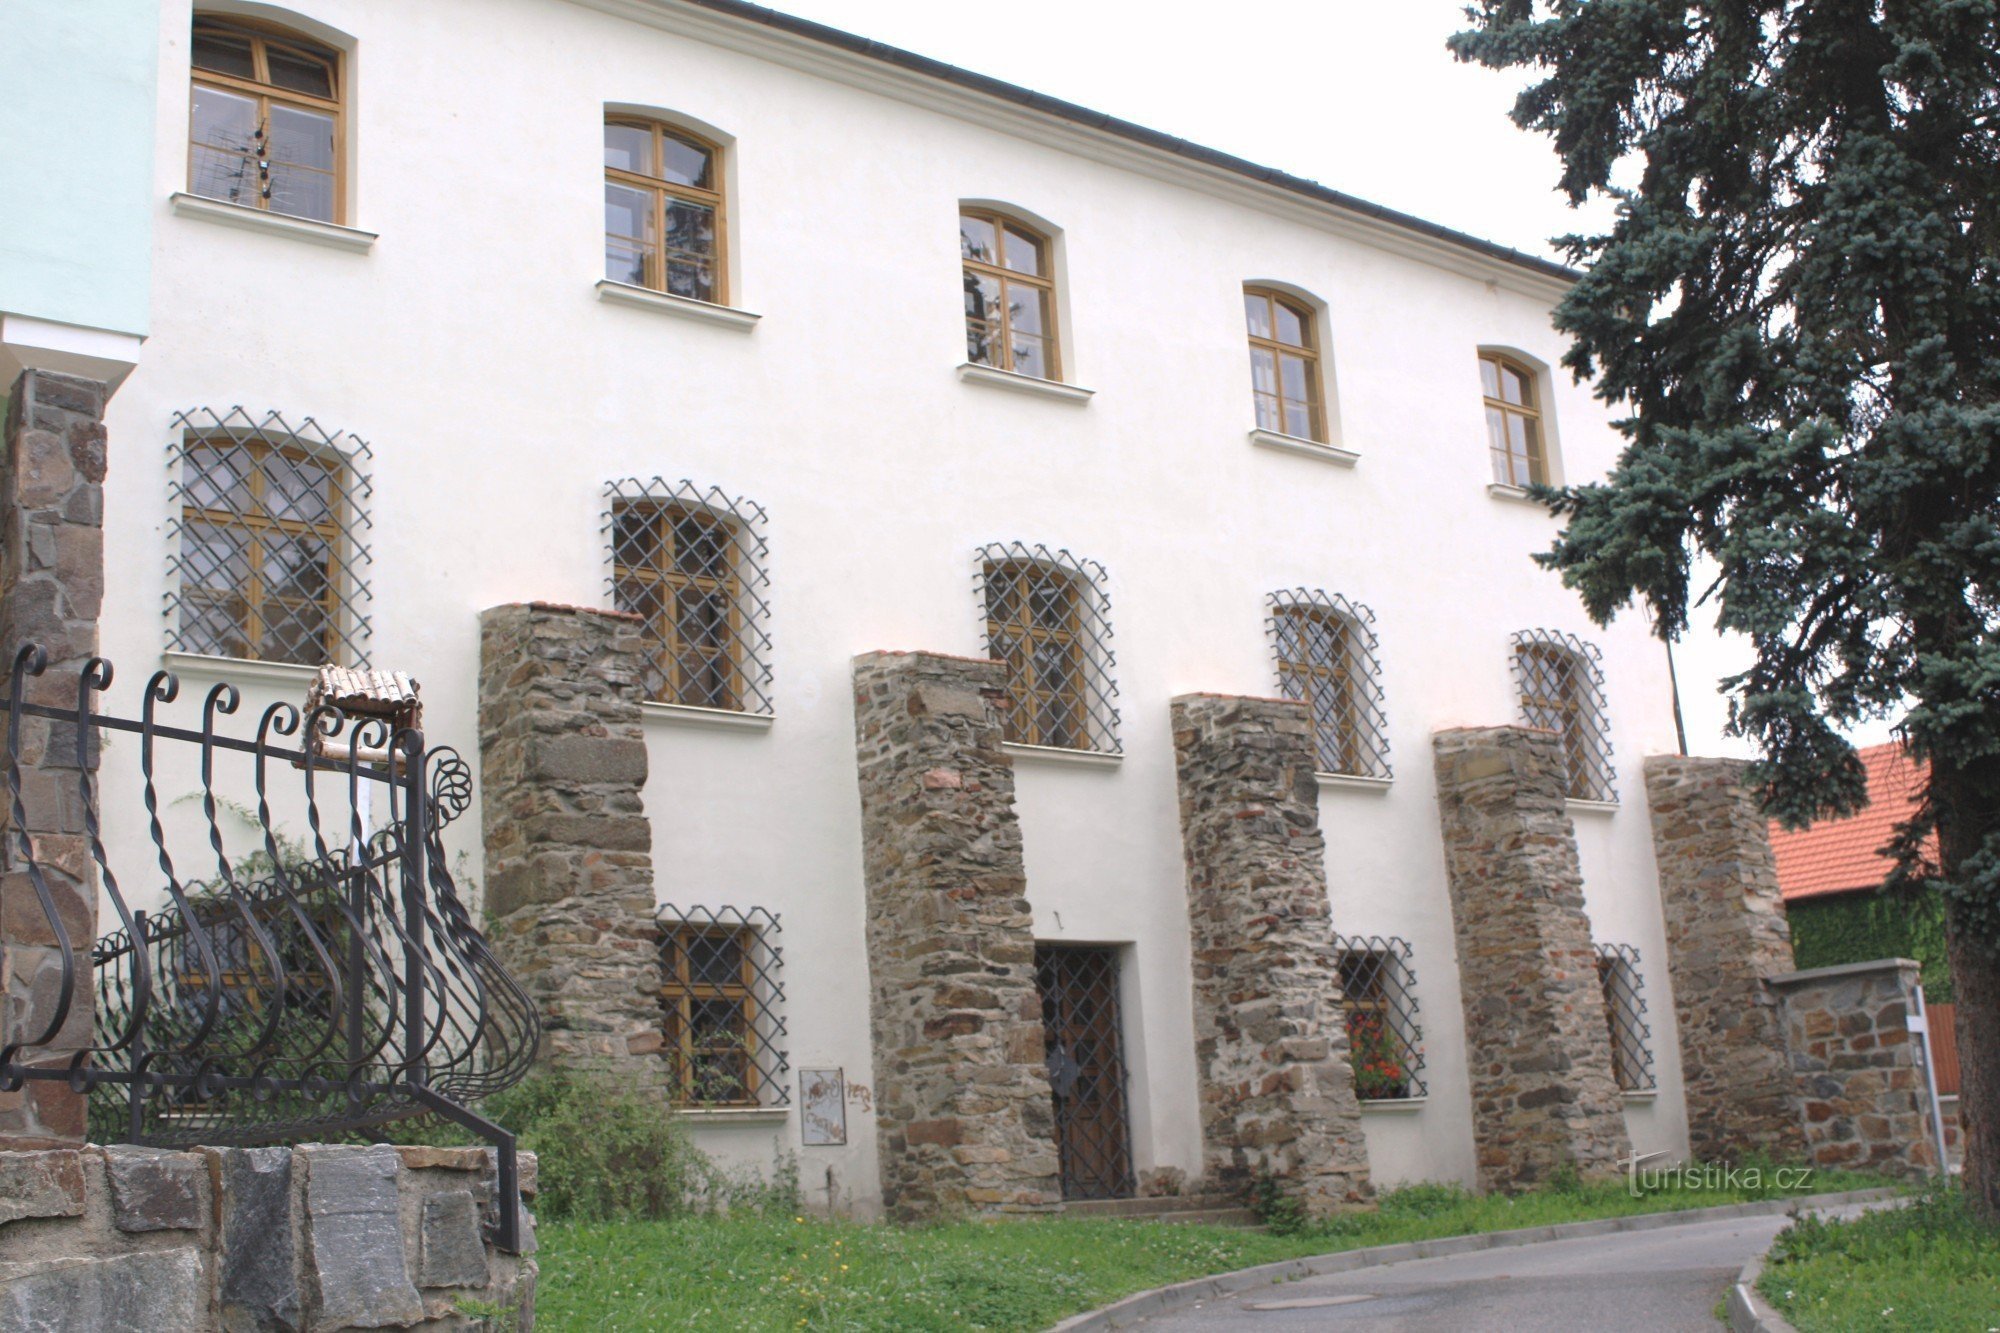 The preserved Renaissance part of the building